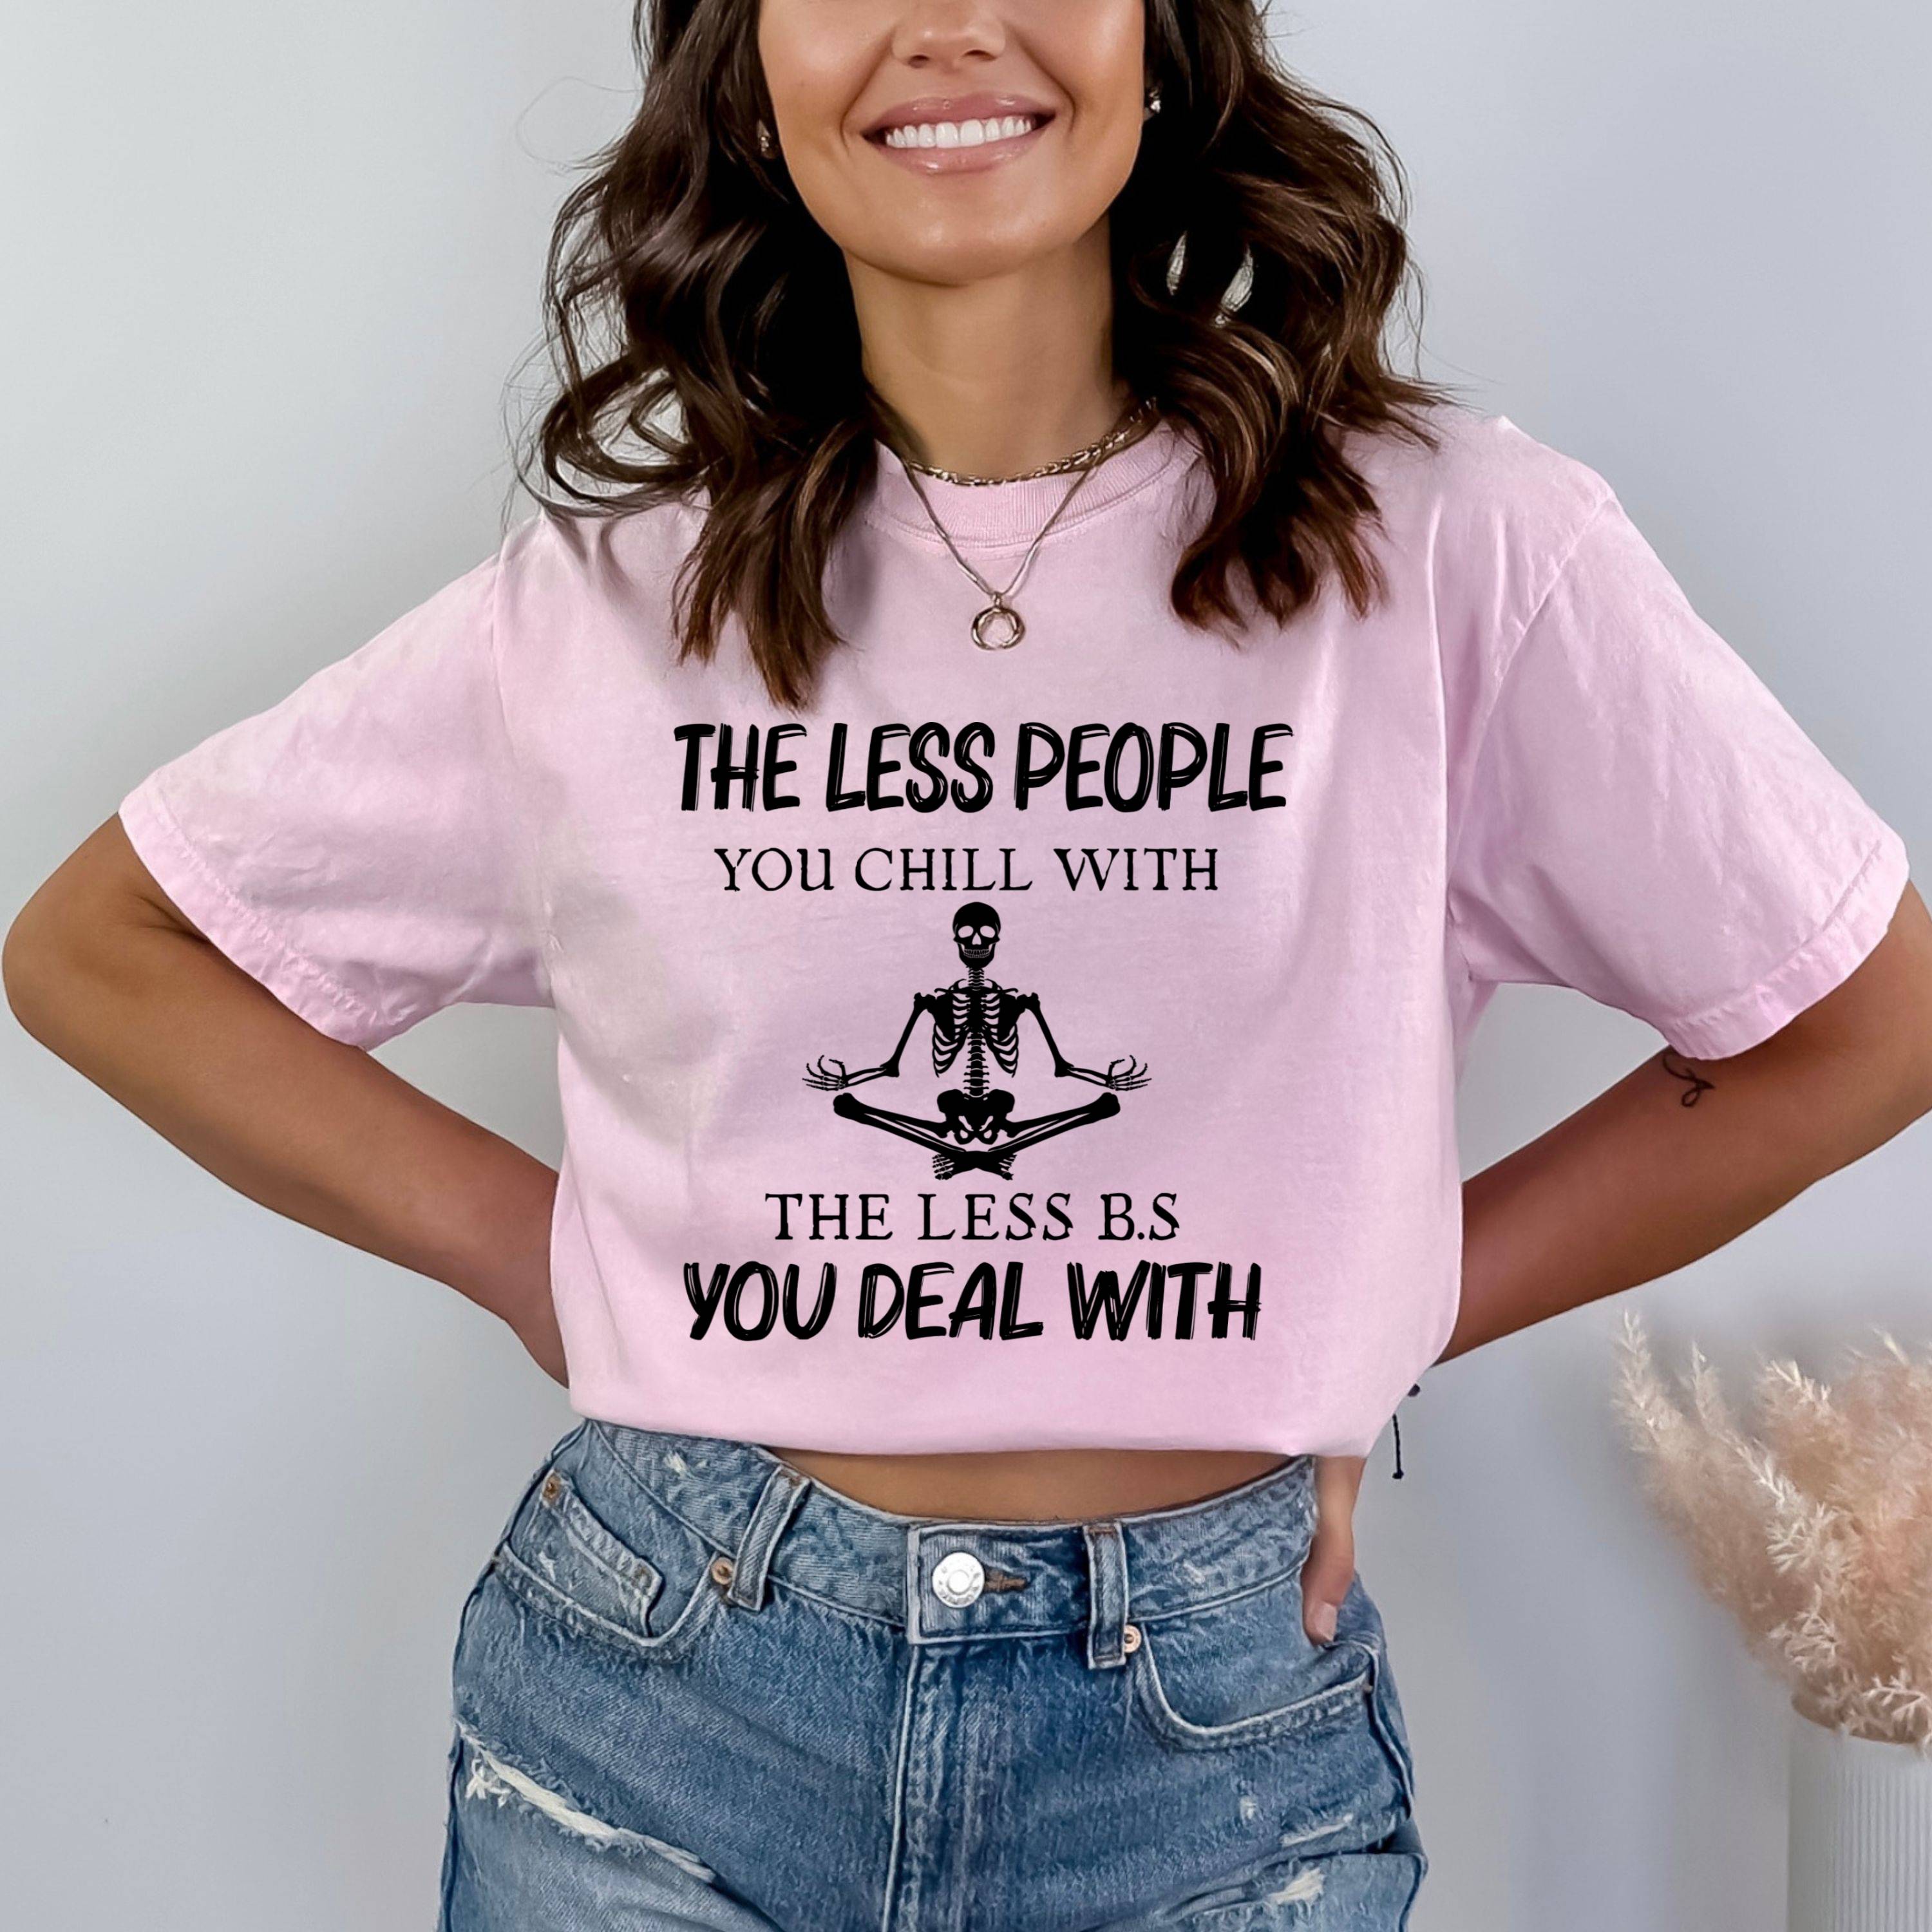 The Less B.s You Deal With - Bella canvas